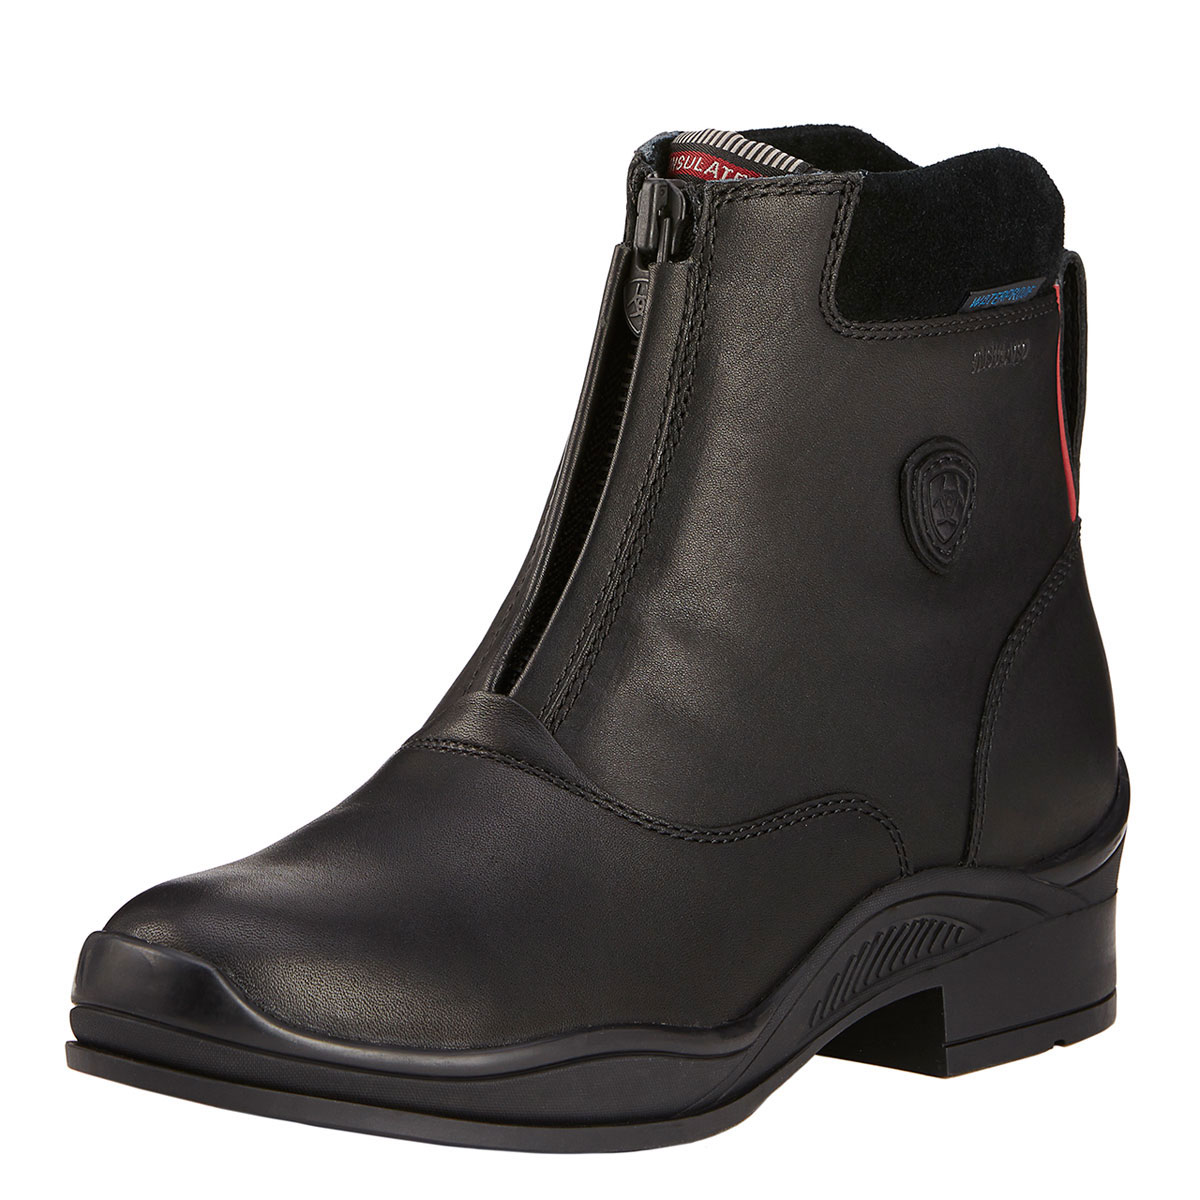 ariat h20 paddock boots